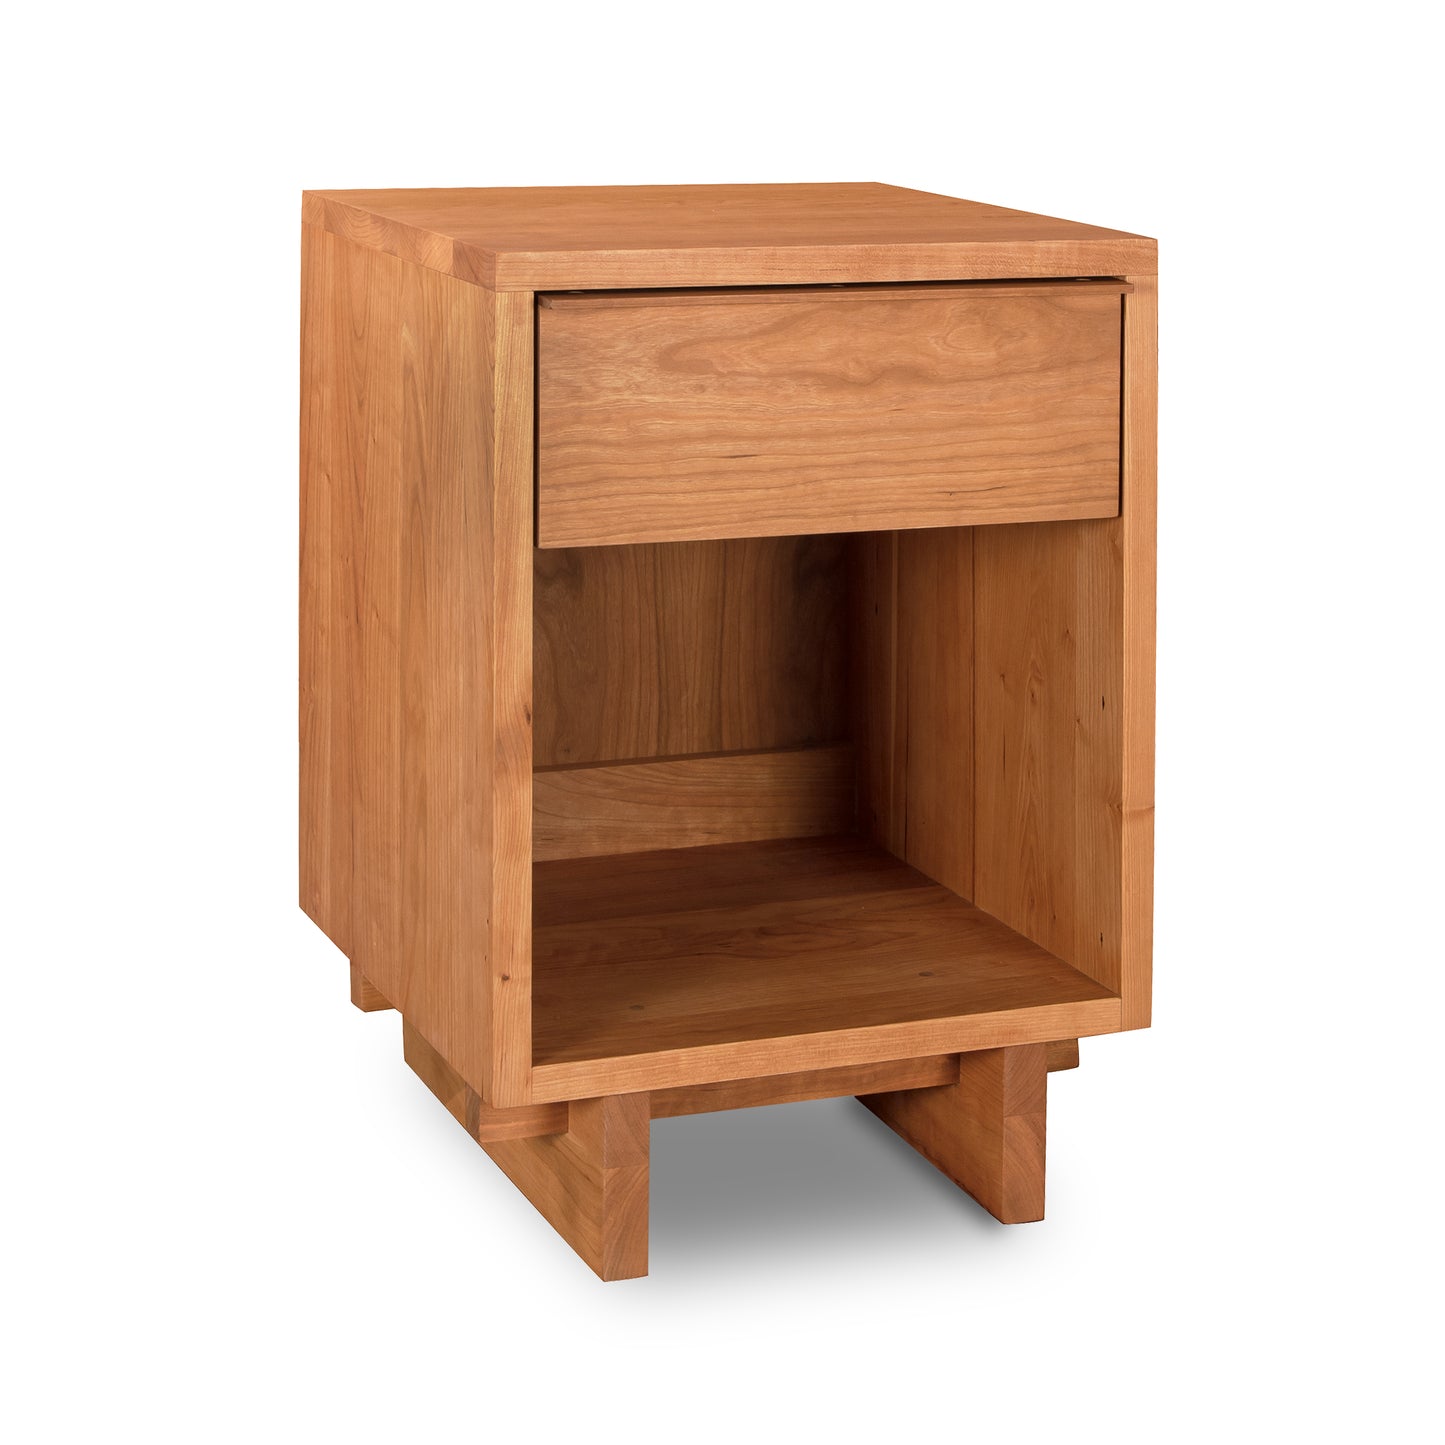 A Vermont Furniture Designs Kipling 1-Drawer Enclosed Shelf Nightstand in natural wood, with an open shelf, isolated on a white background.